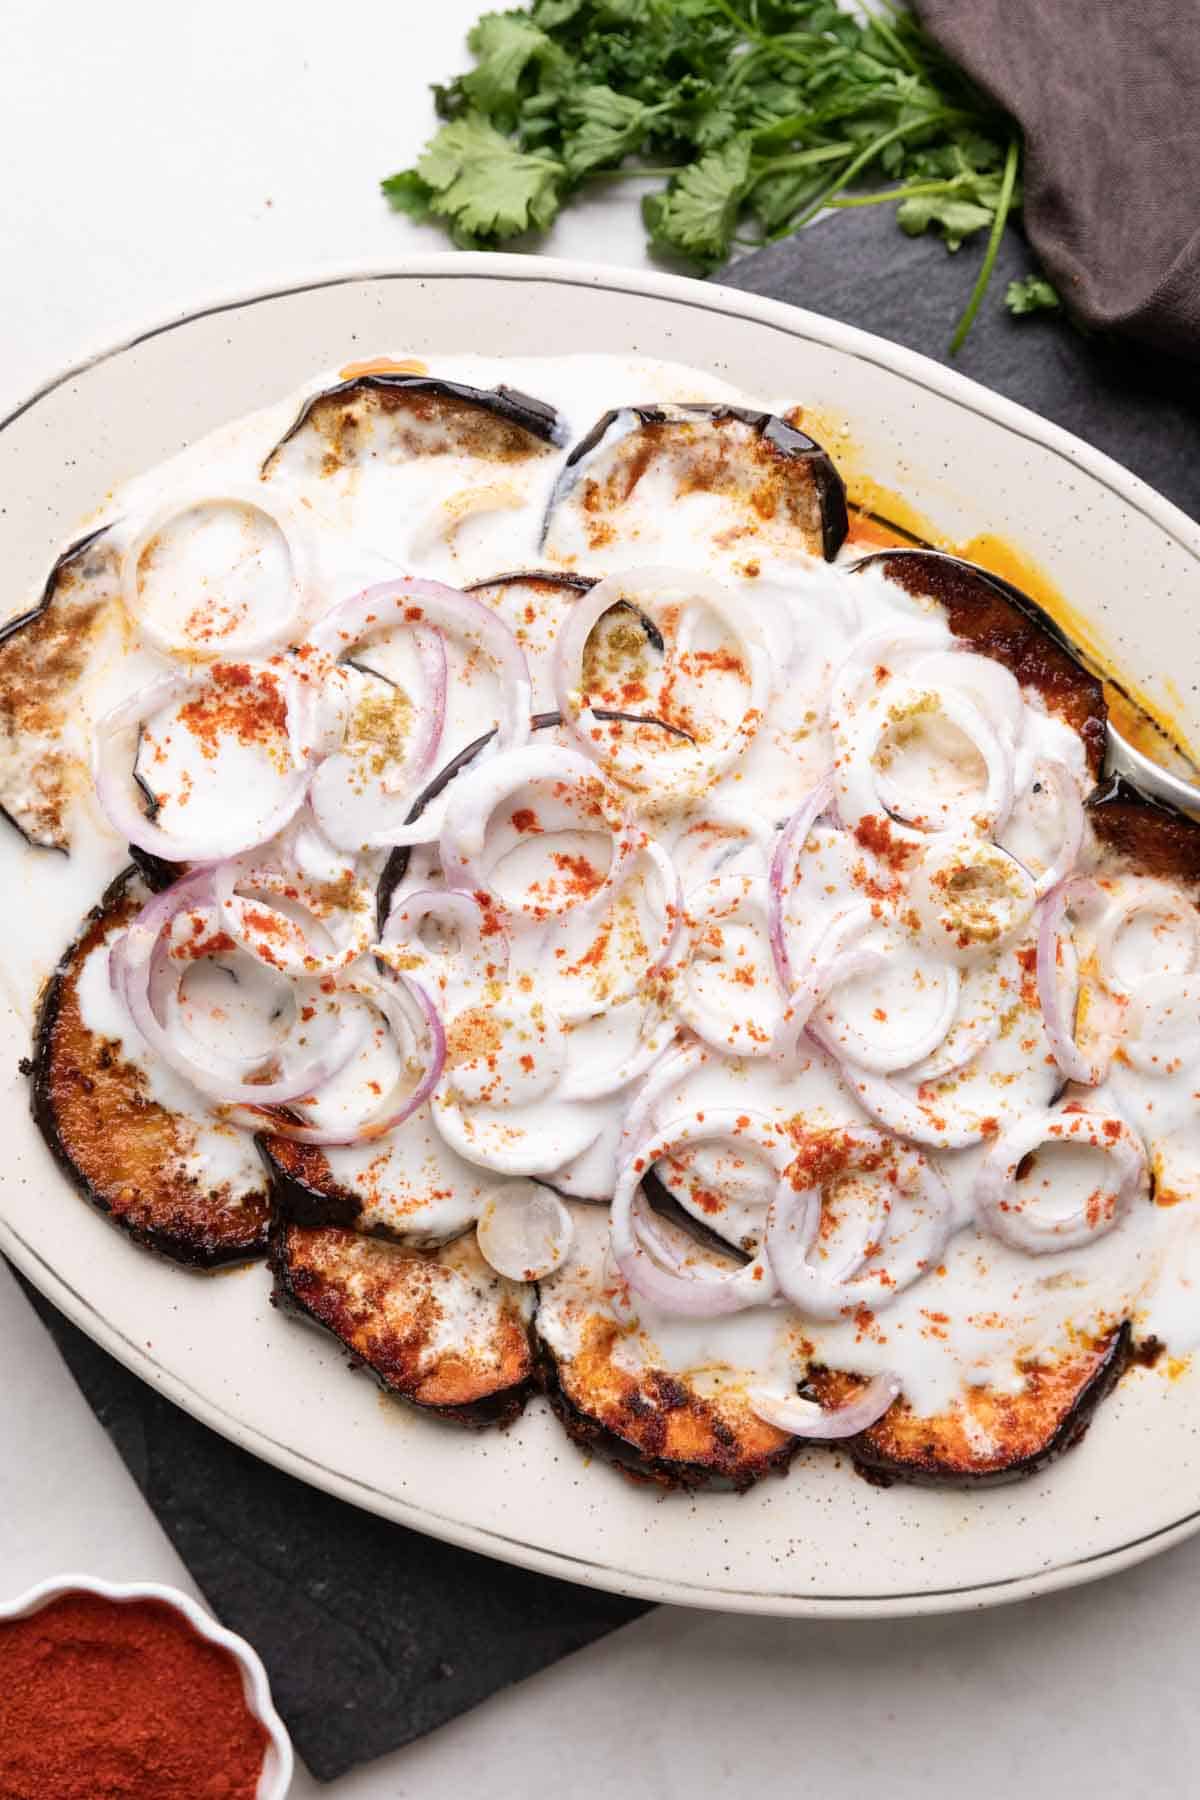 platter with fried eggplant slices and sliced onion topped with a curd mix